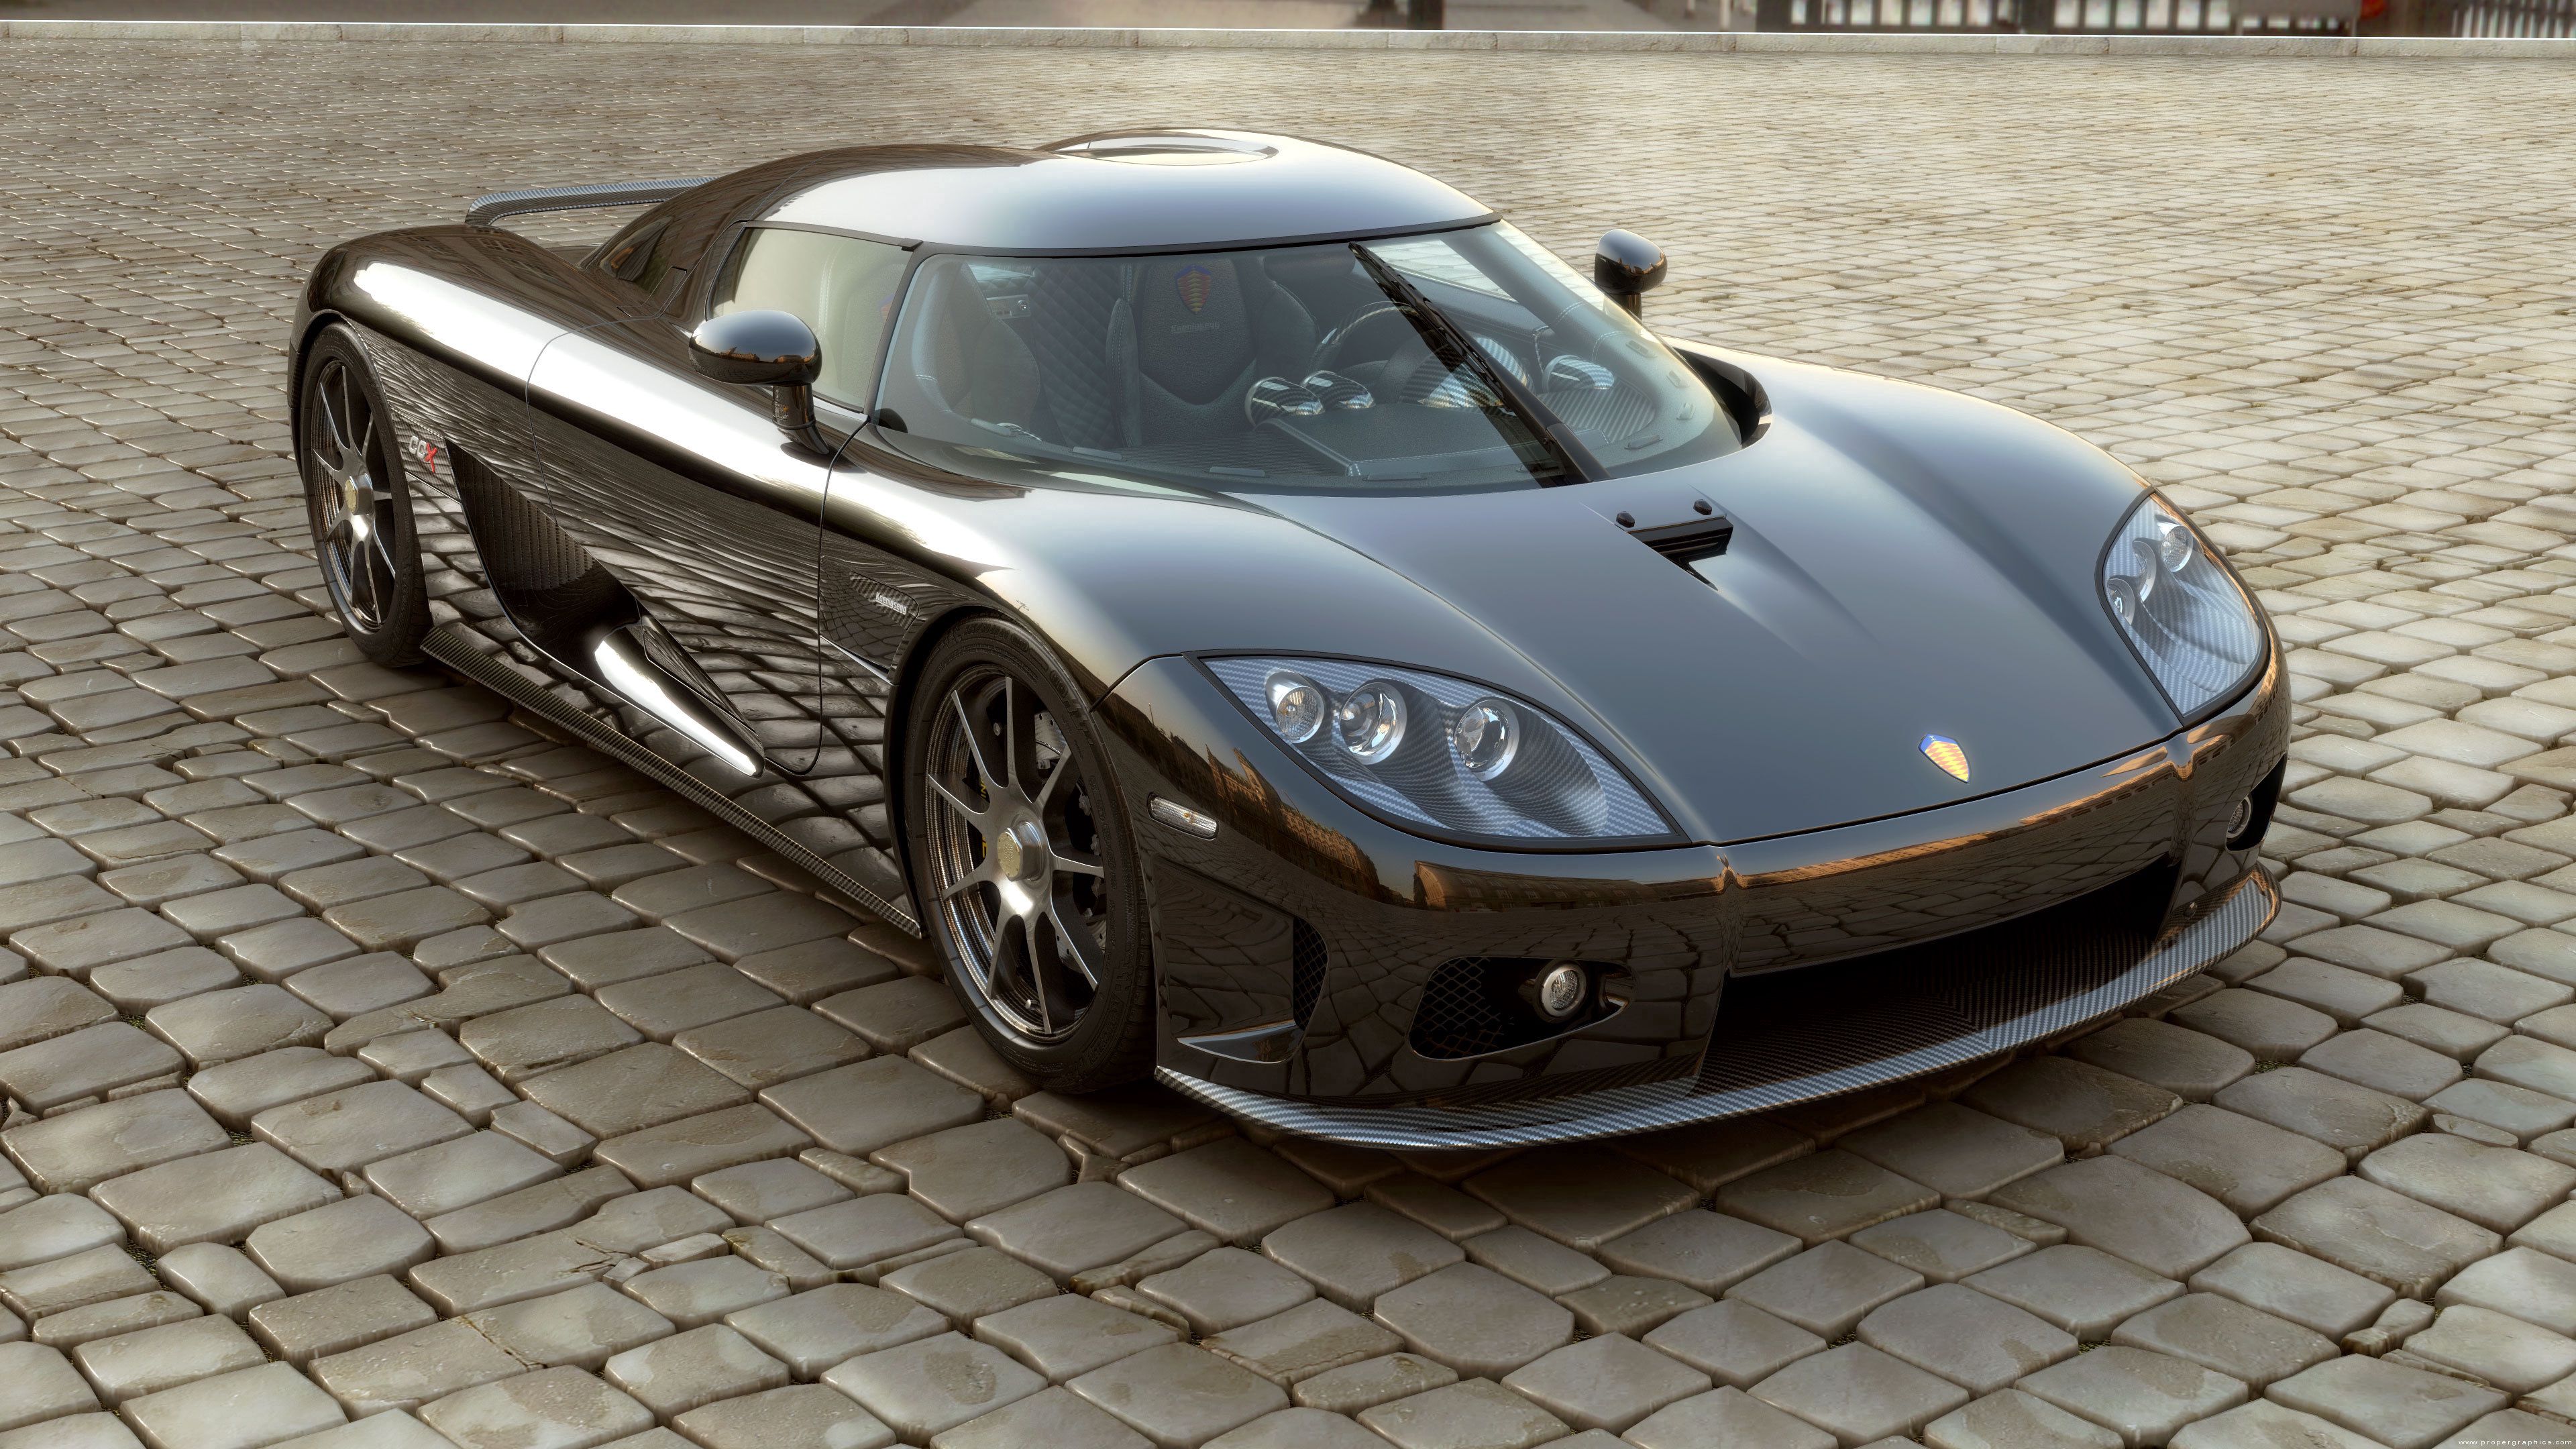 128914 download wallpaper koenigsegg, cars, front view, koenigsegg ccx screensavers and pictures for free